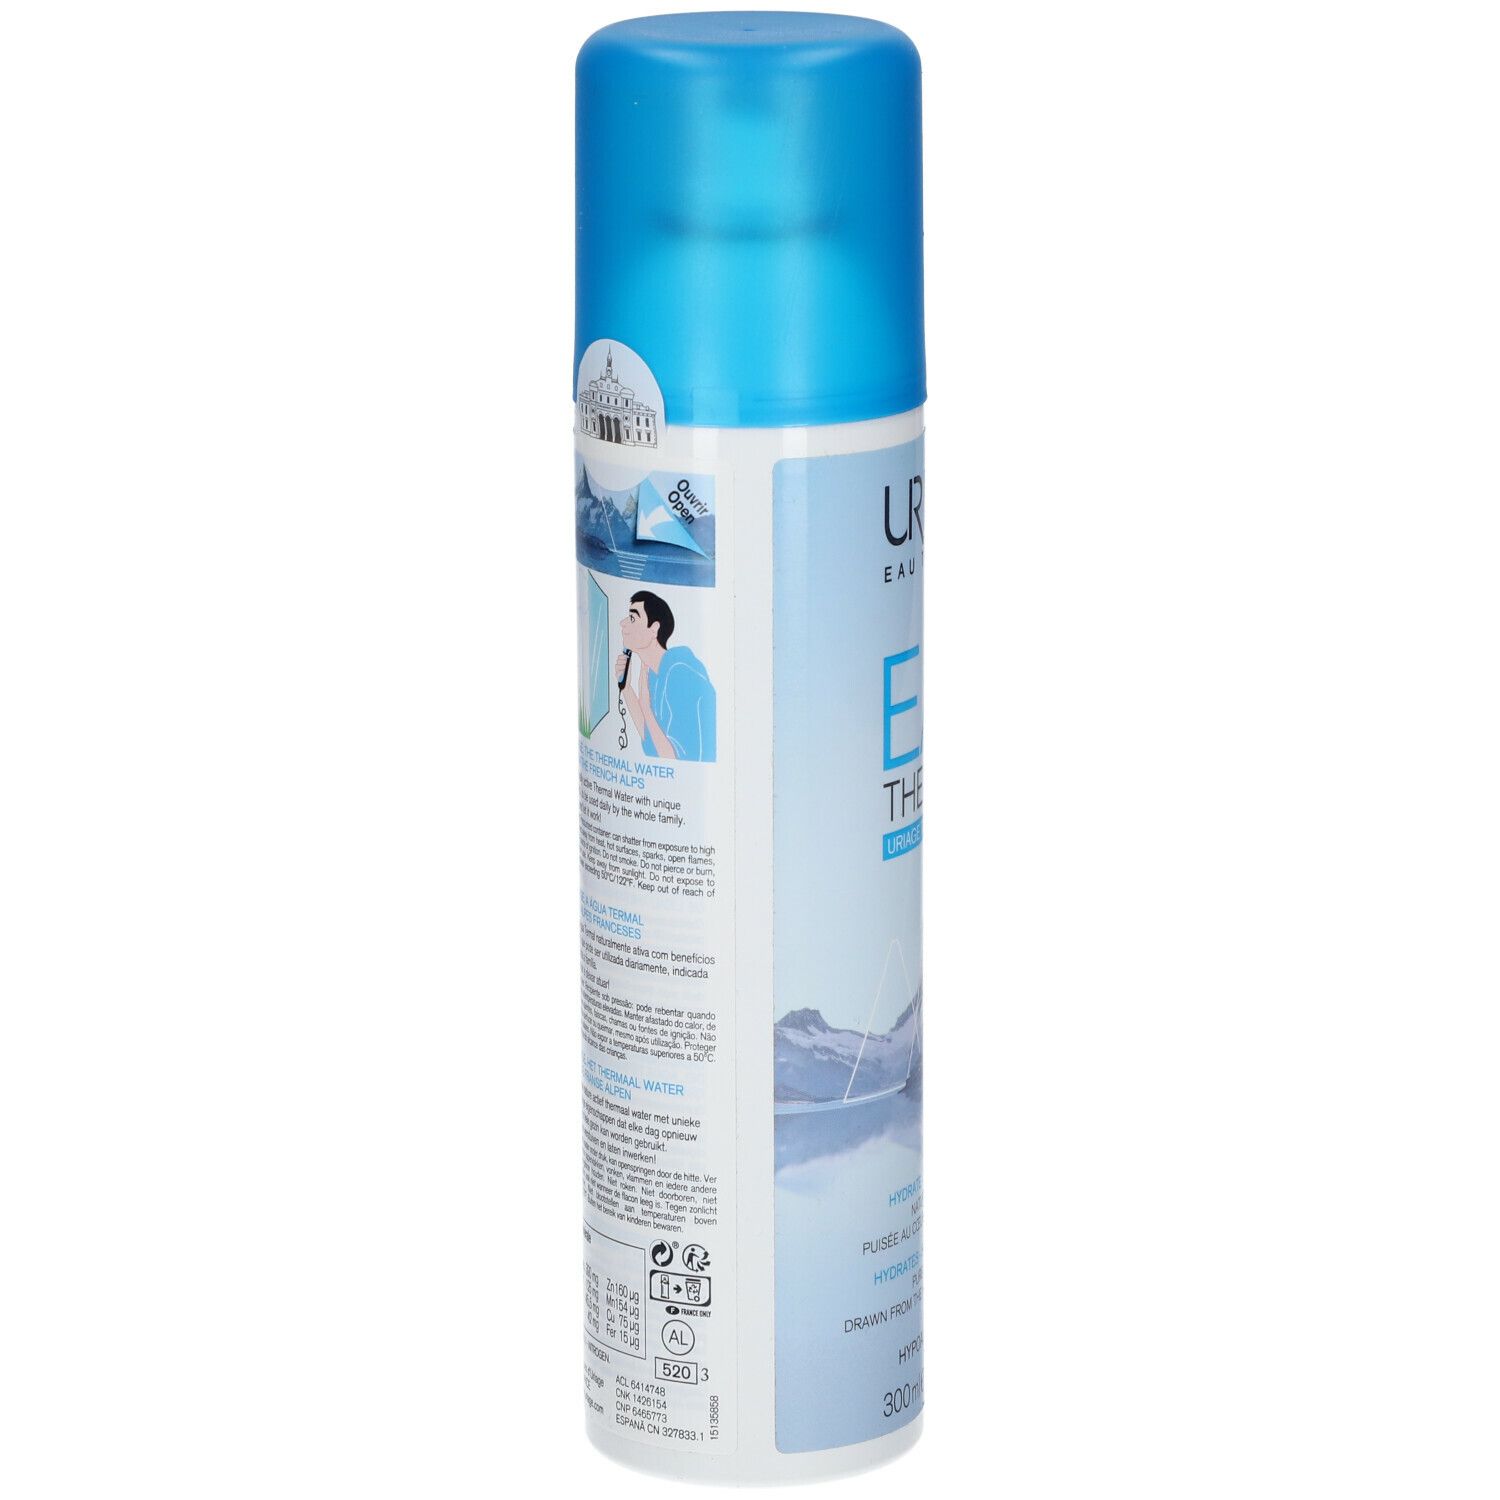 URIAGE Eau Thermale  spray